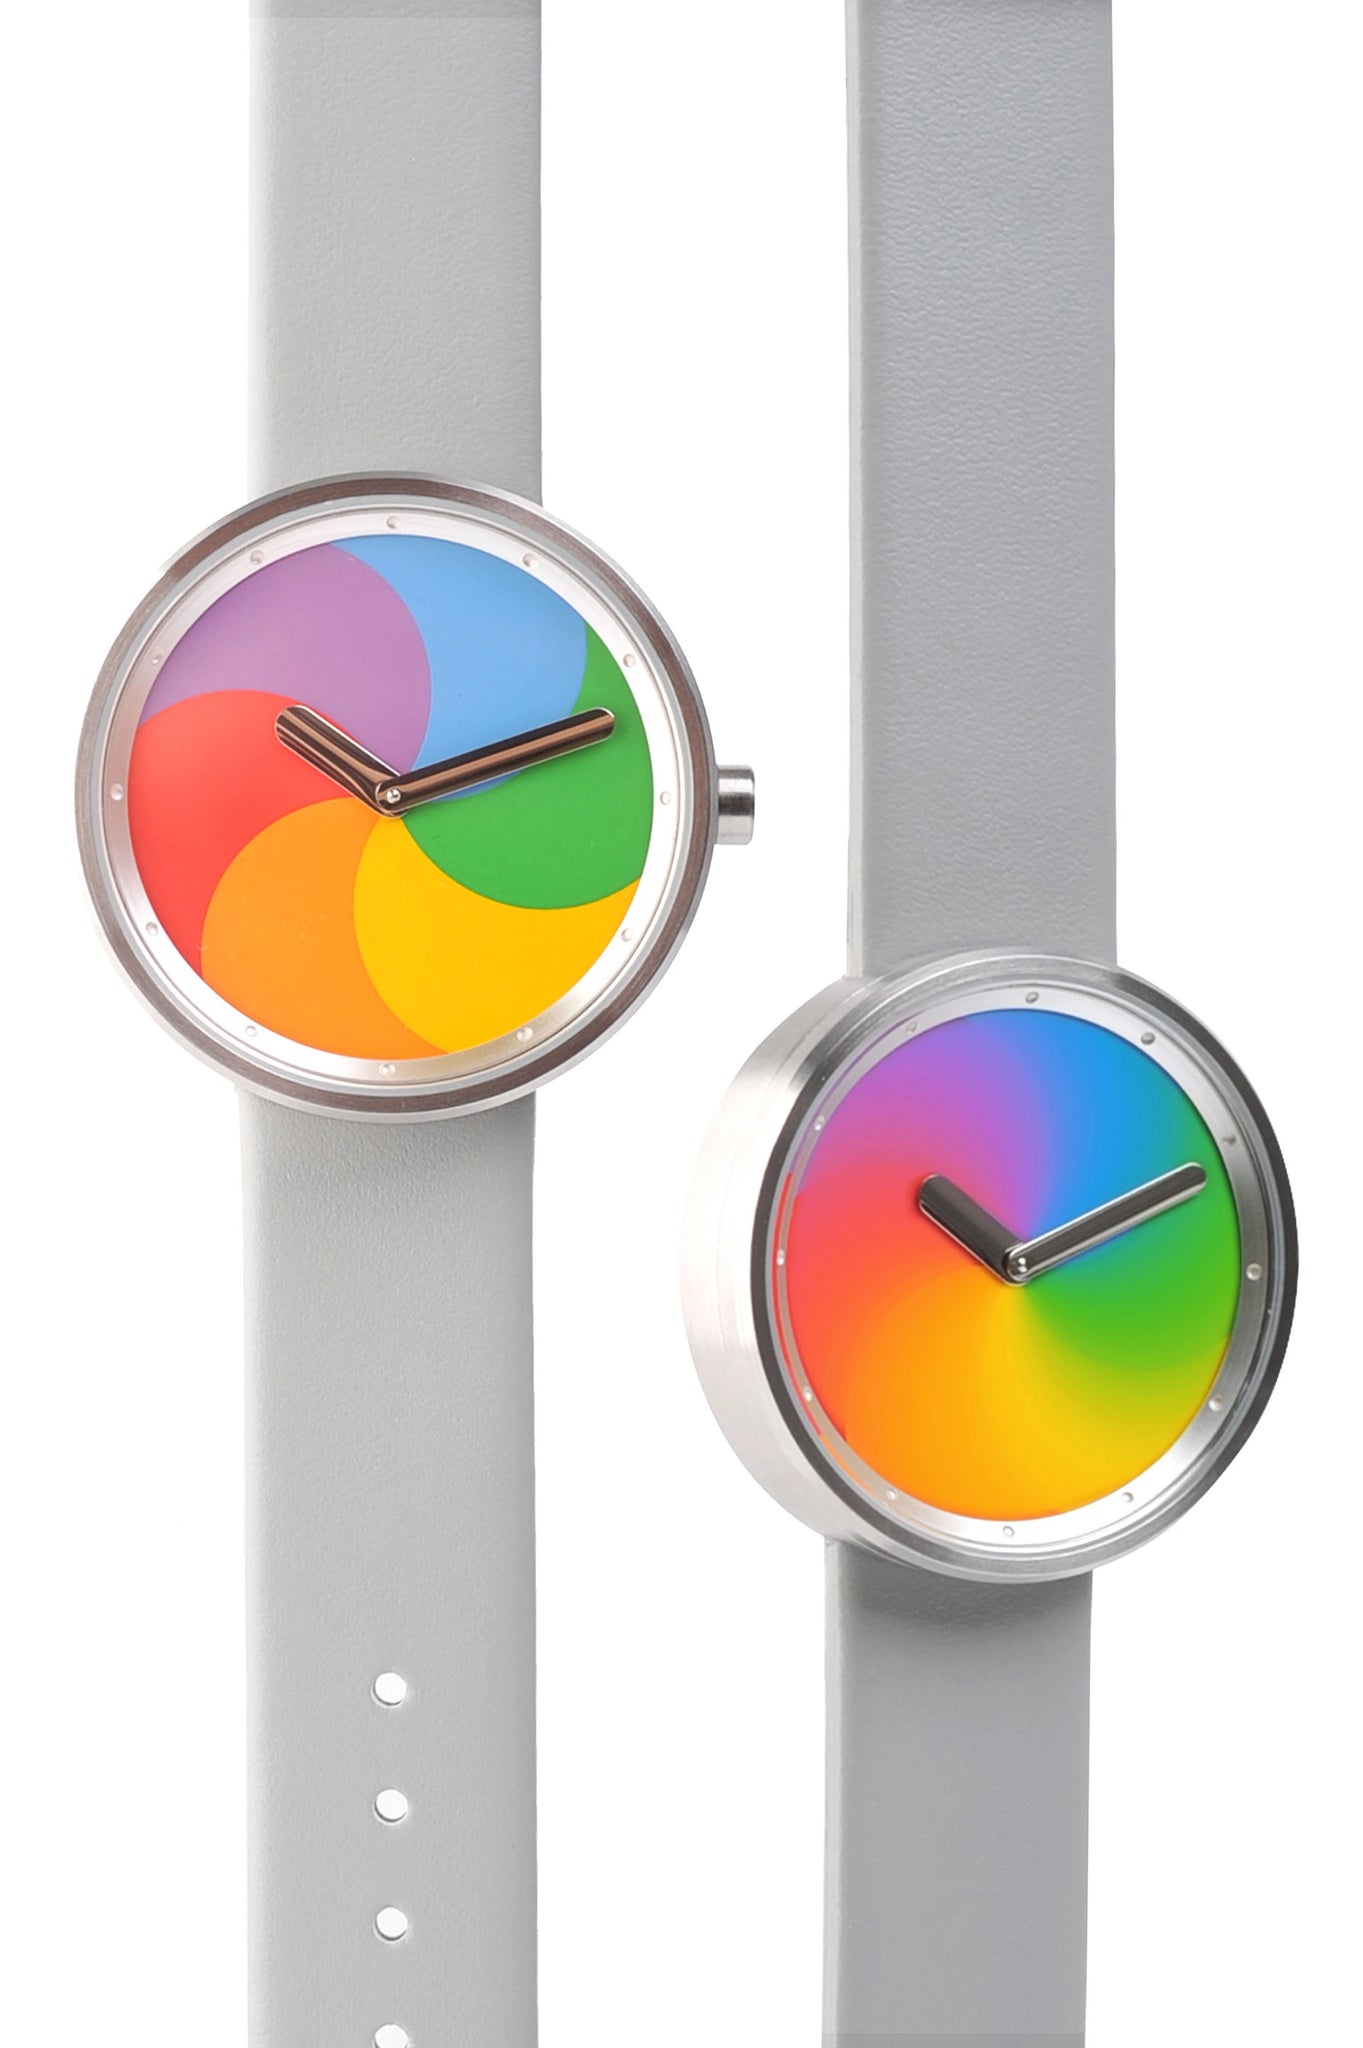 A close-up of two "Spinning Beach Ball" watches with strap: one is static, and the other one is spinning.